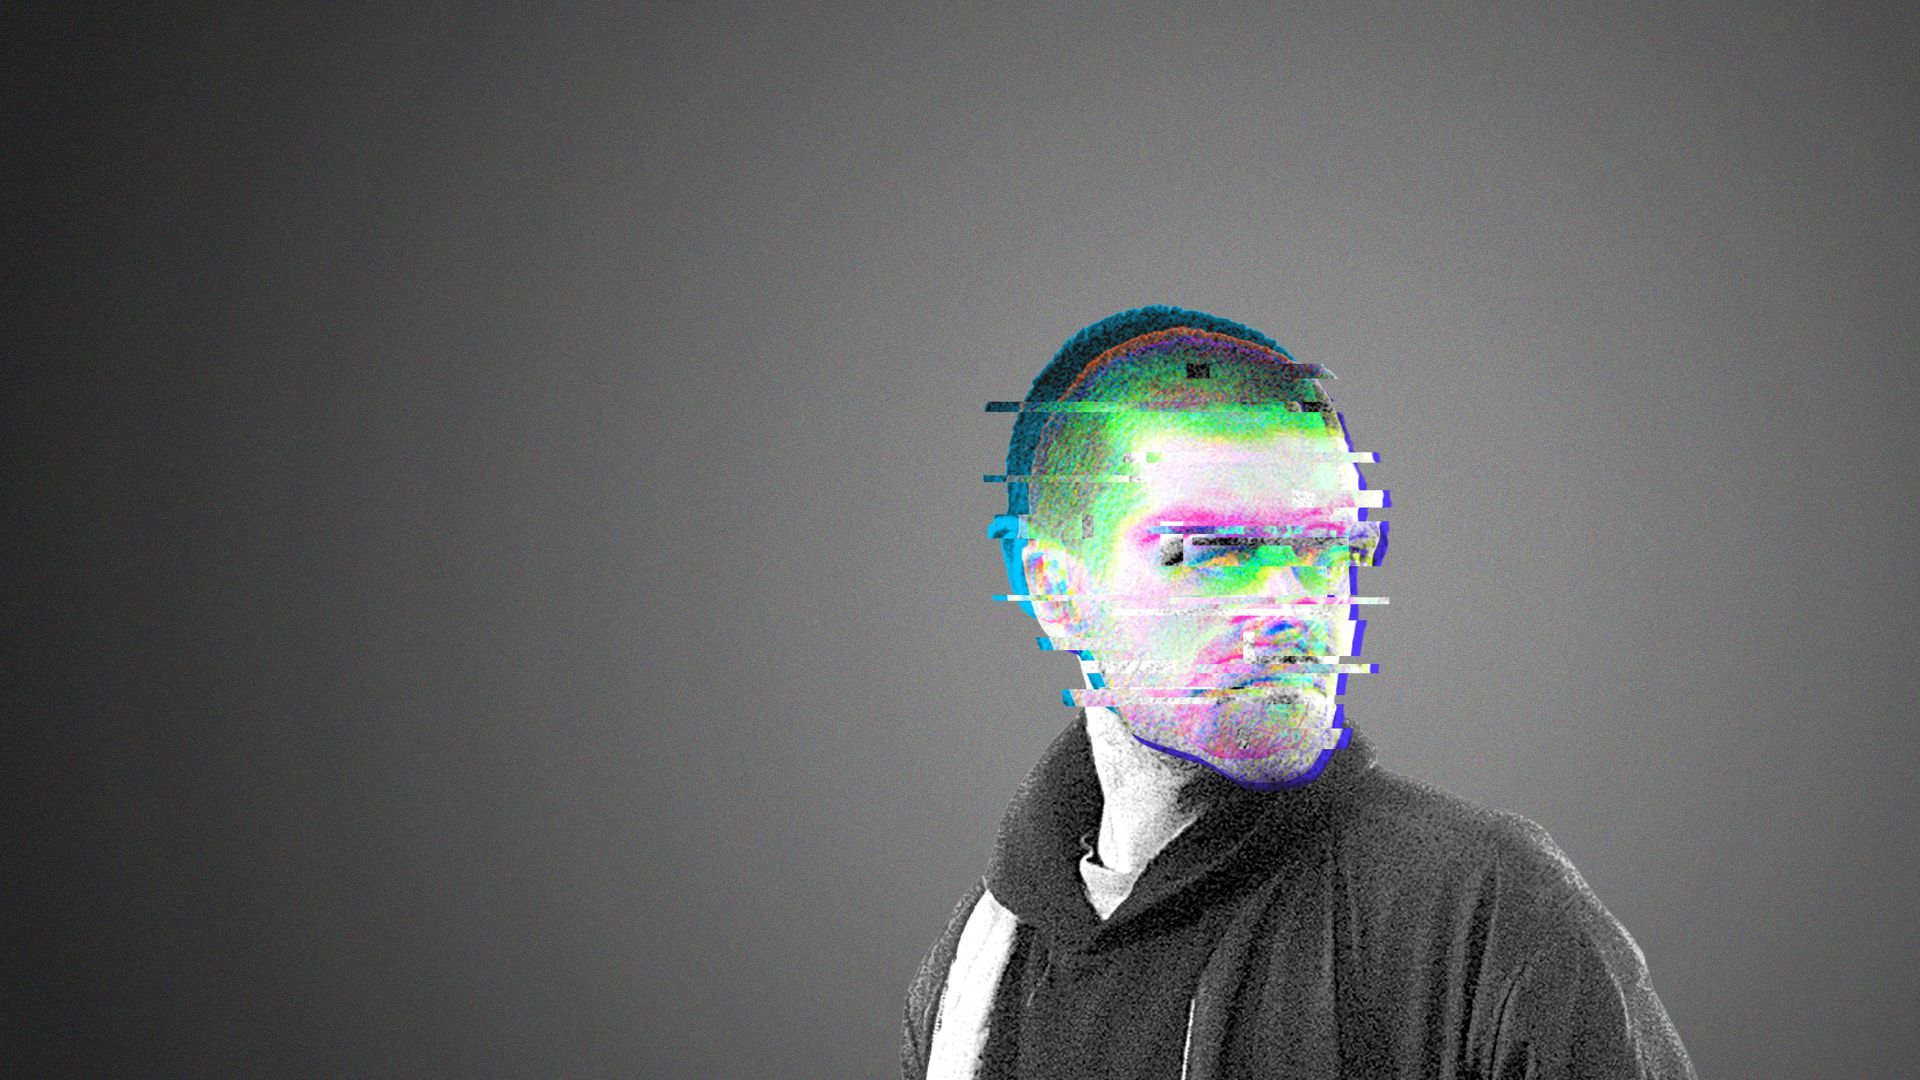 Illustration of a man whose face is obscured by digital glitches.